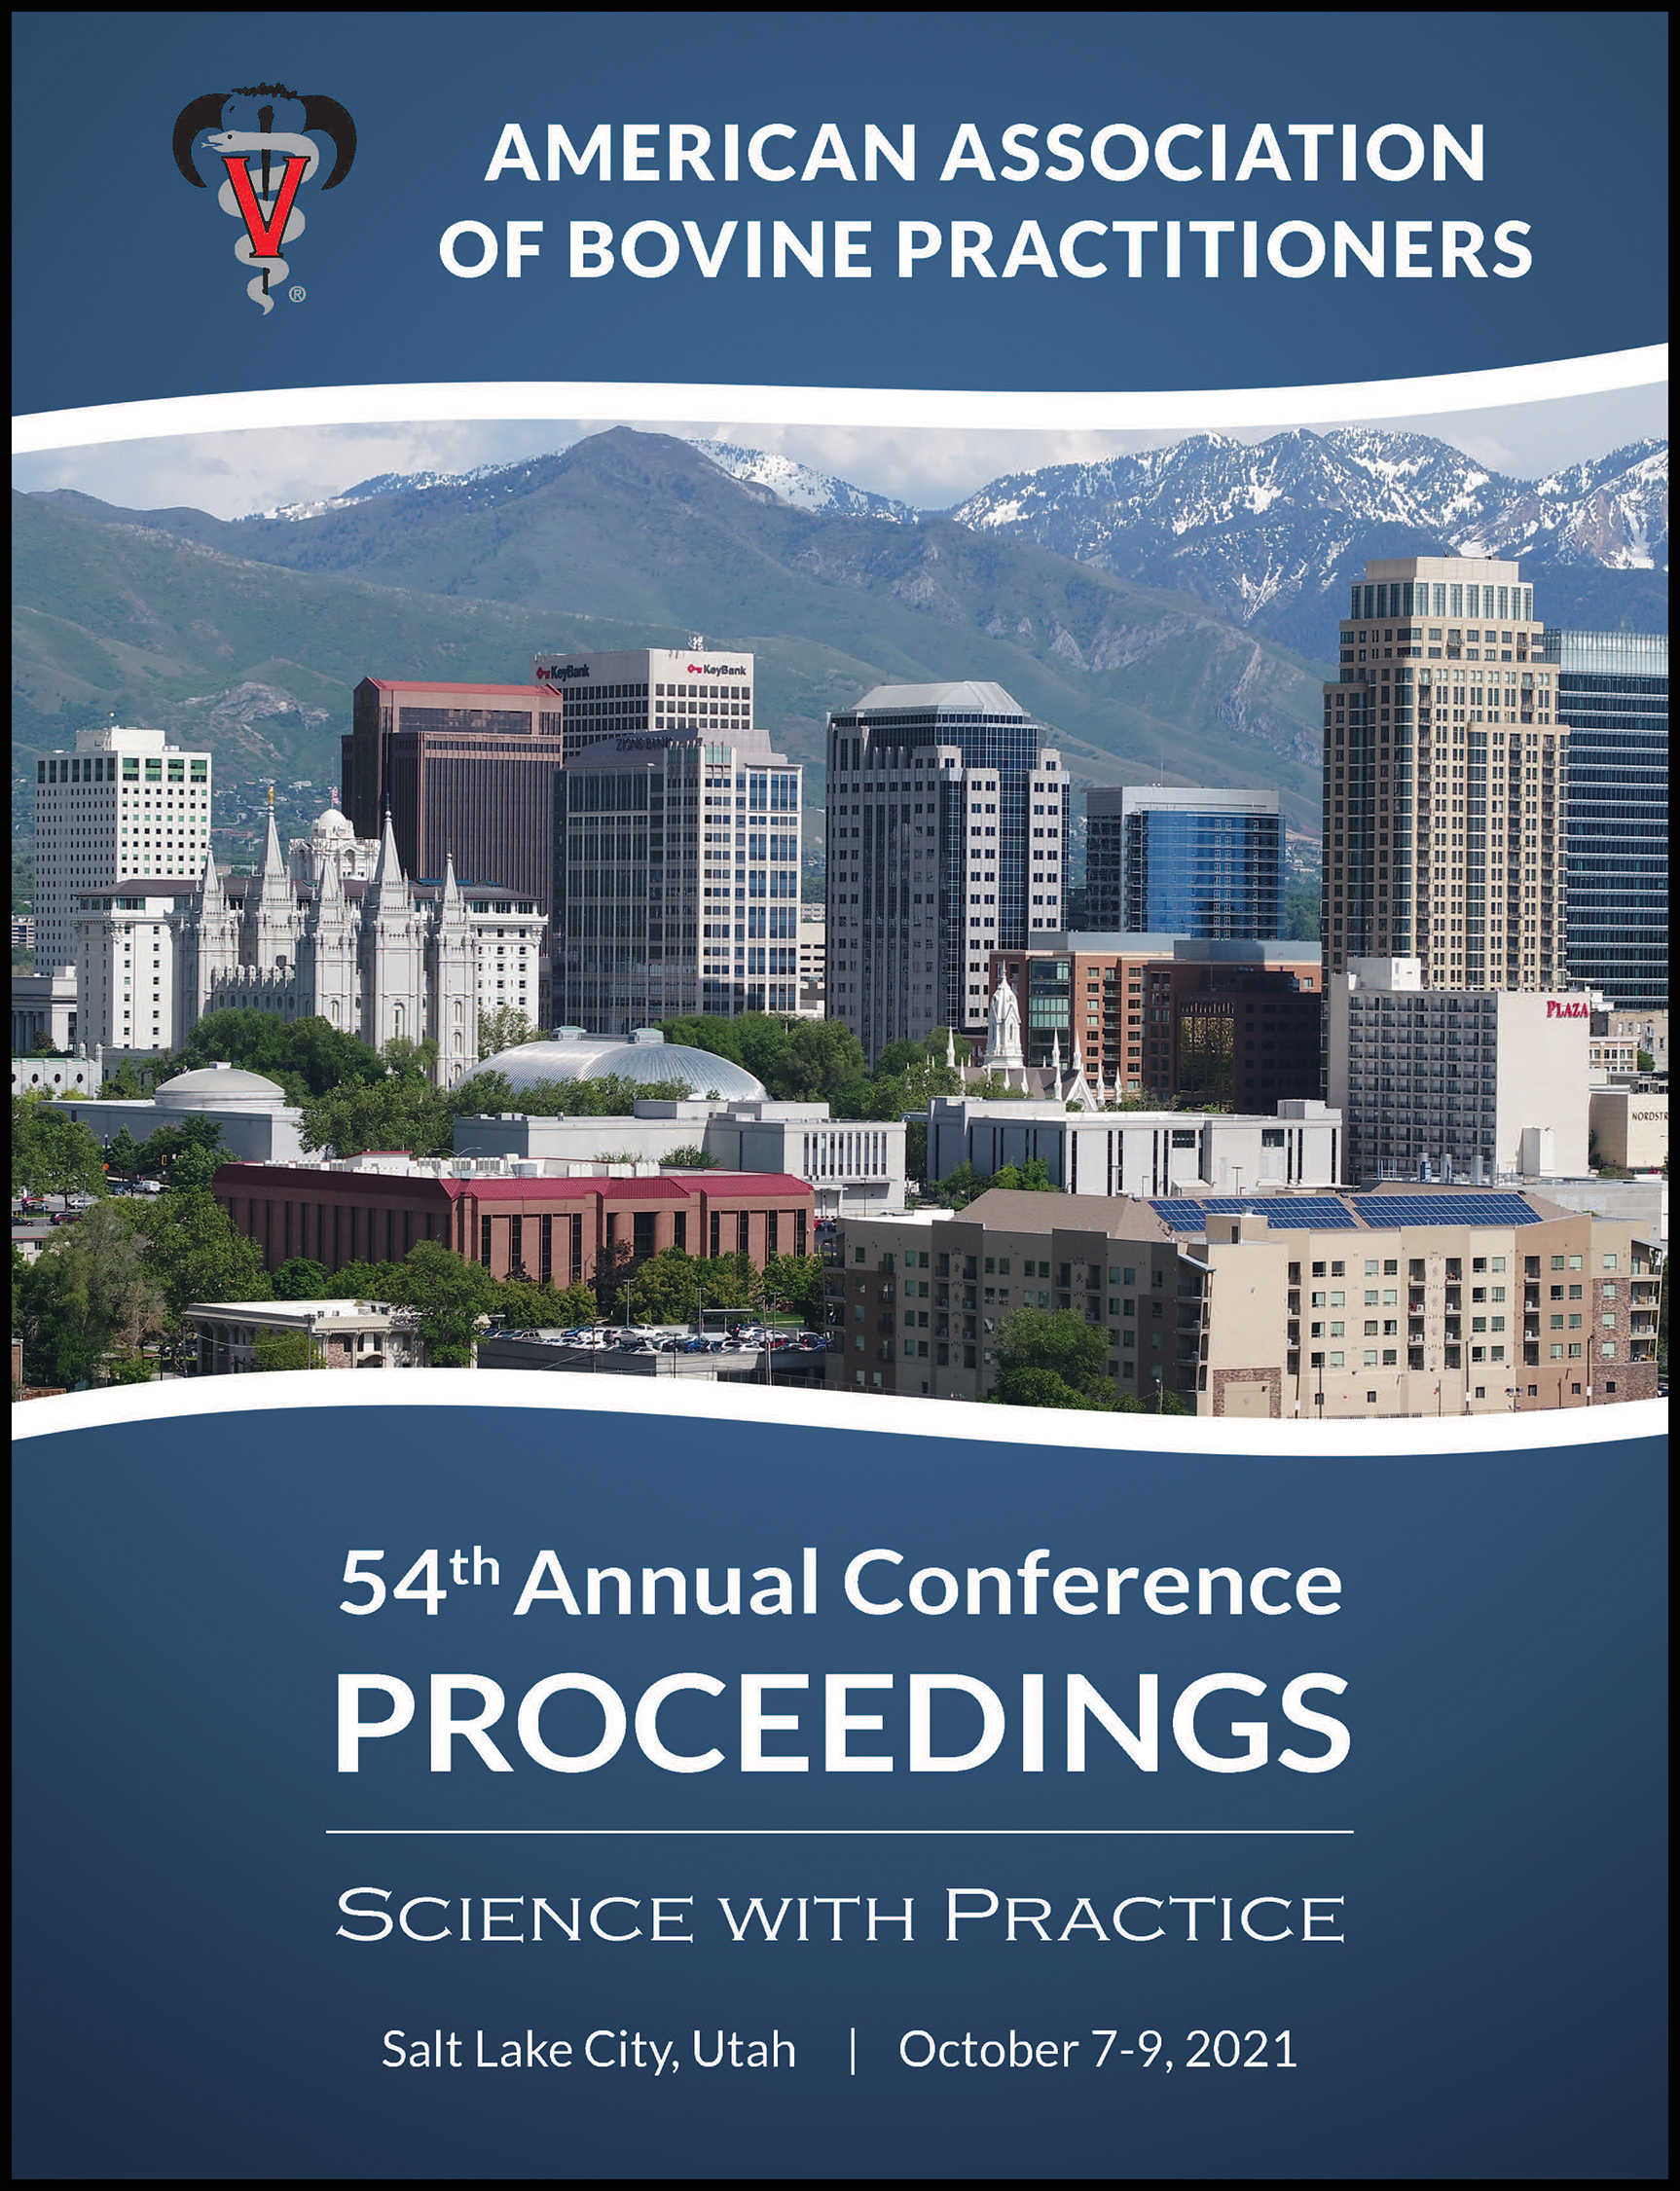 					View 2021 Annual Conference Proceedings
				